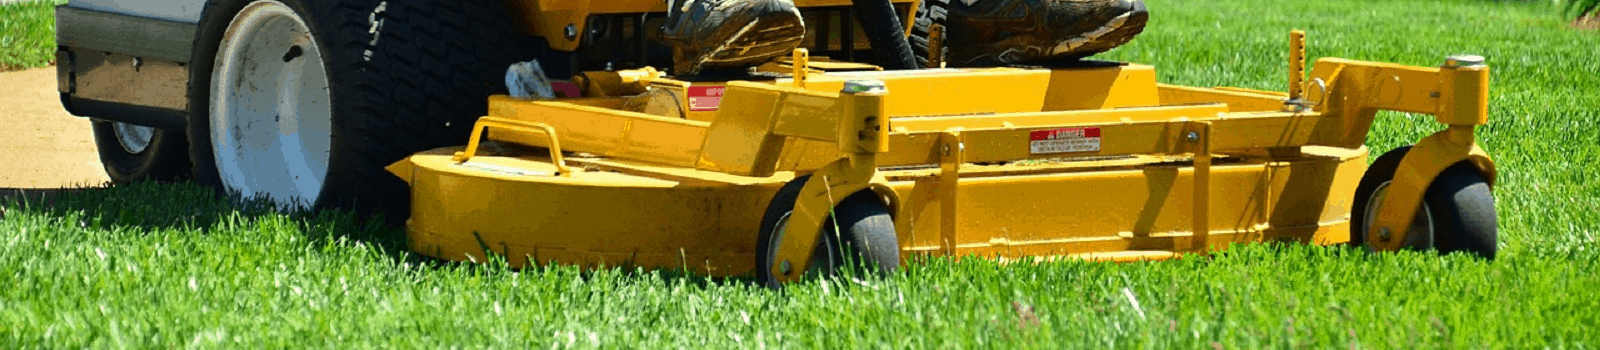 lawn care provider blog - how to properly quote new lawn mowing jobs